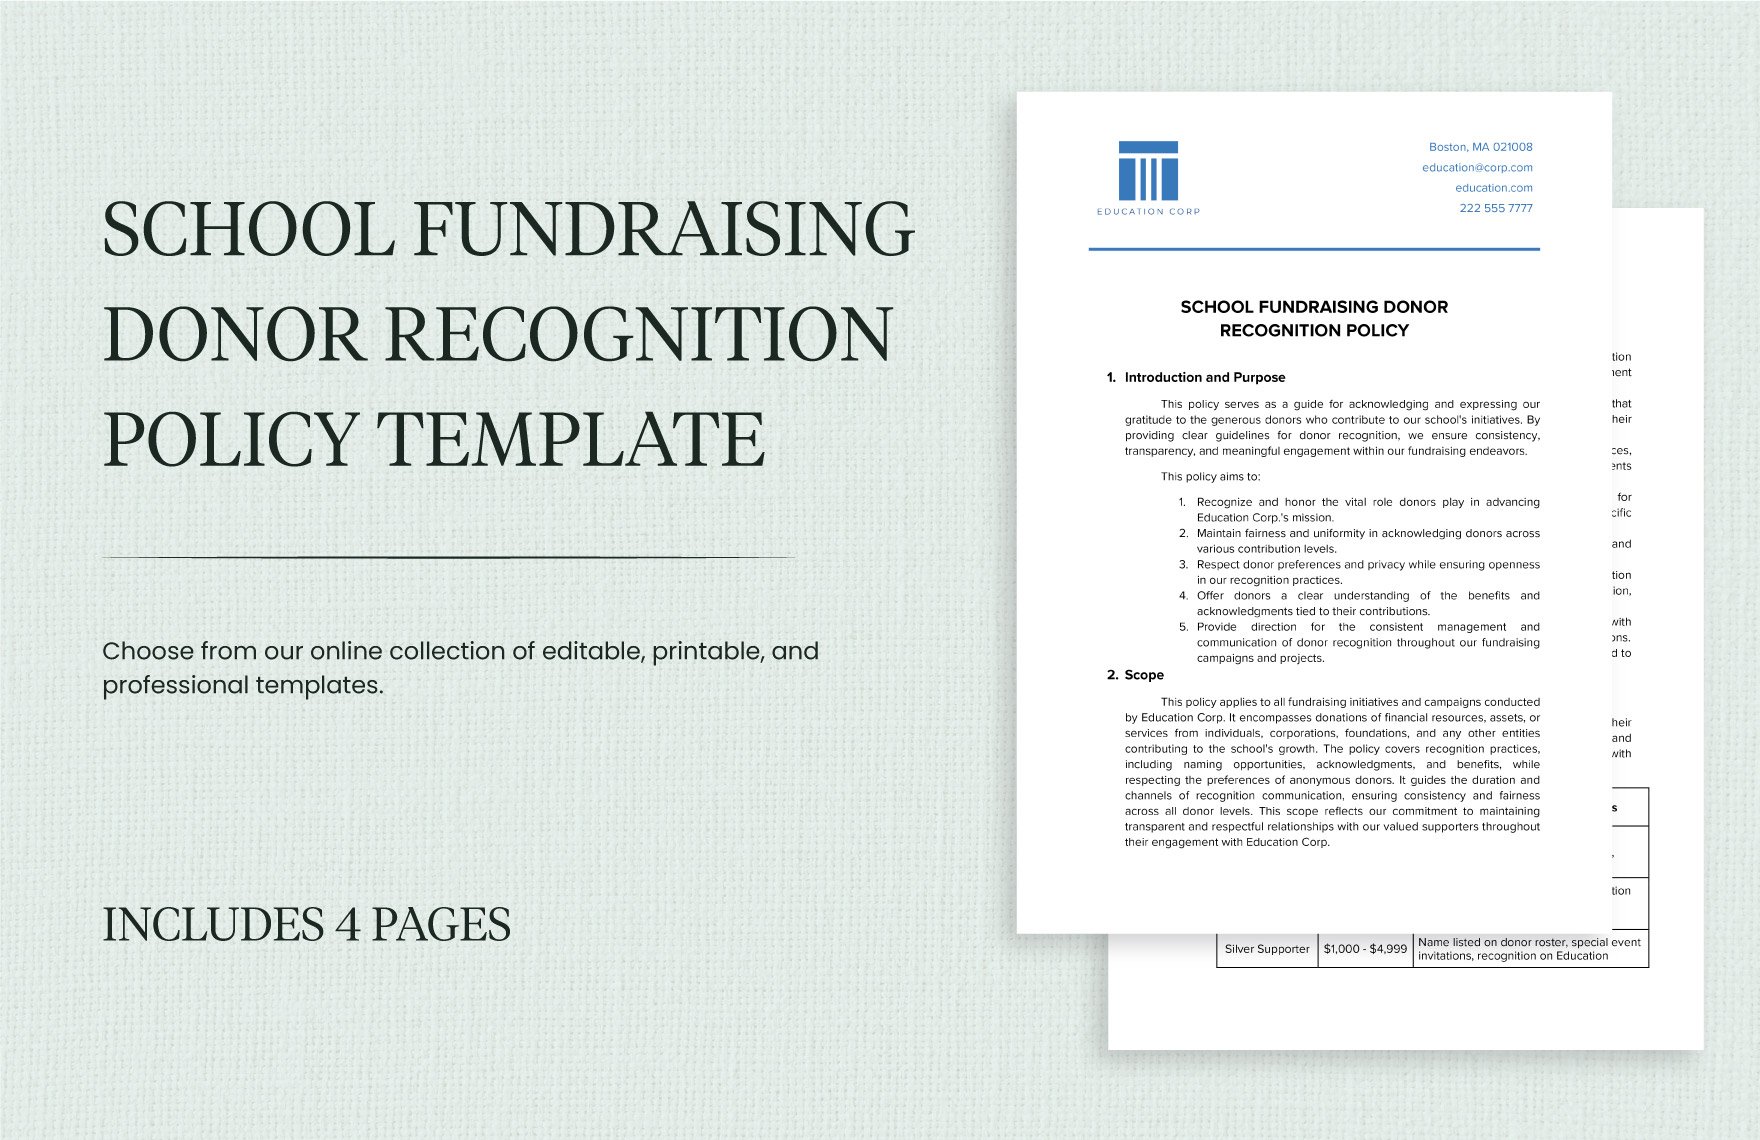 School Fundraising Donor Recognition Policy Template